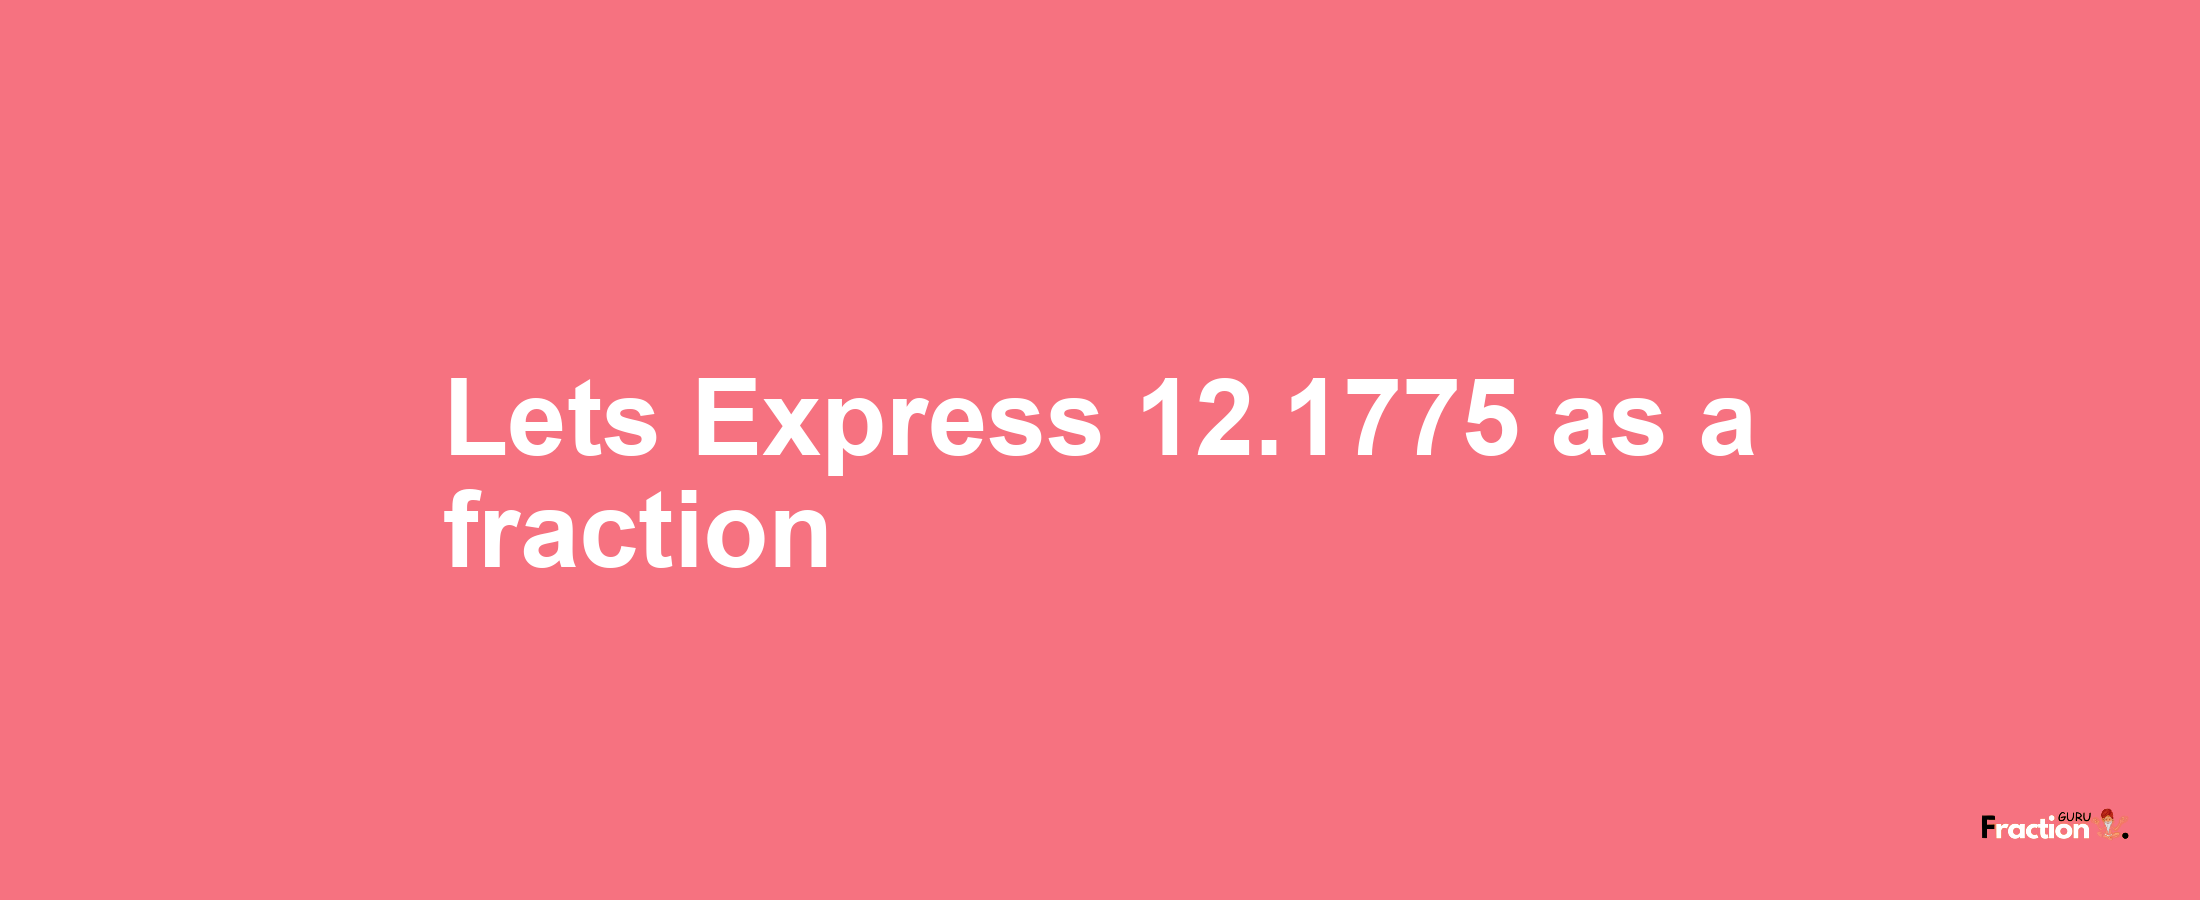 Lets Express 12.1775 as afraction